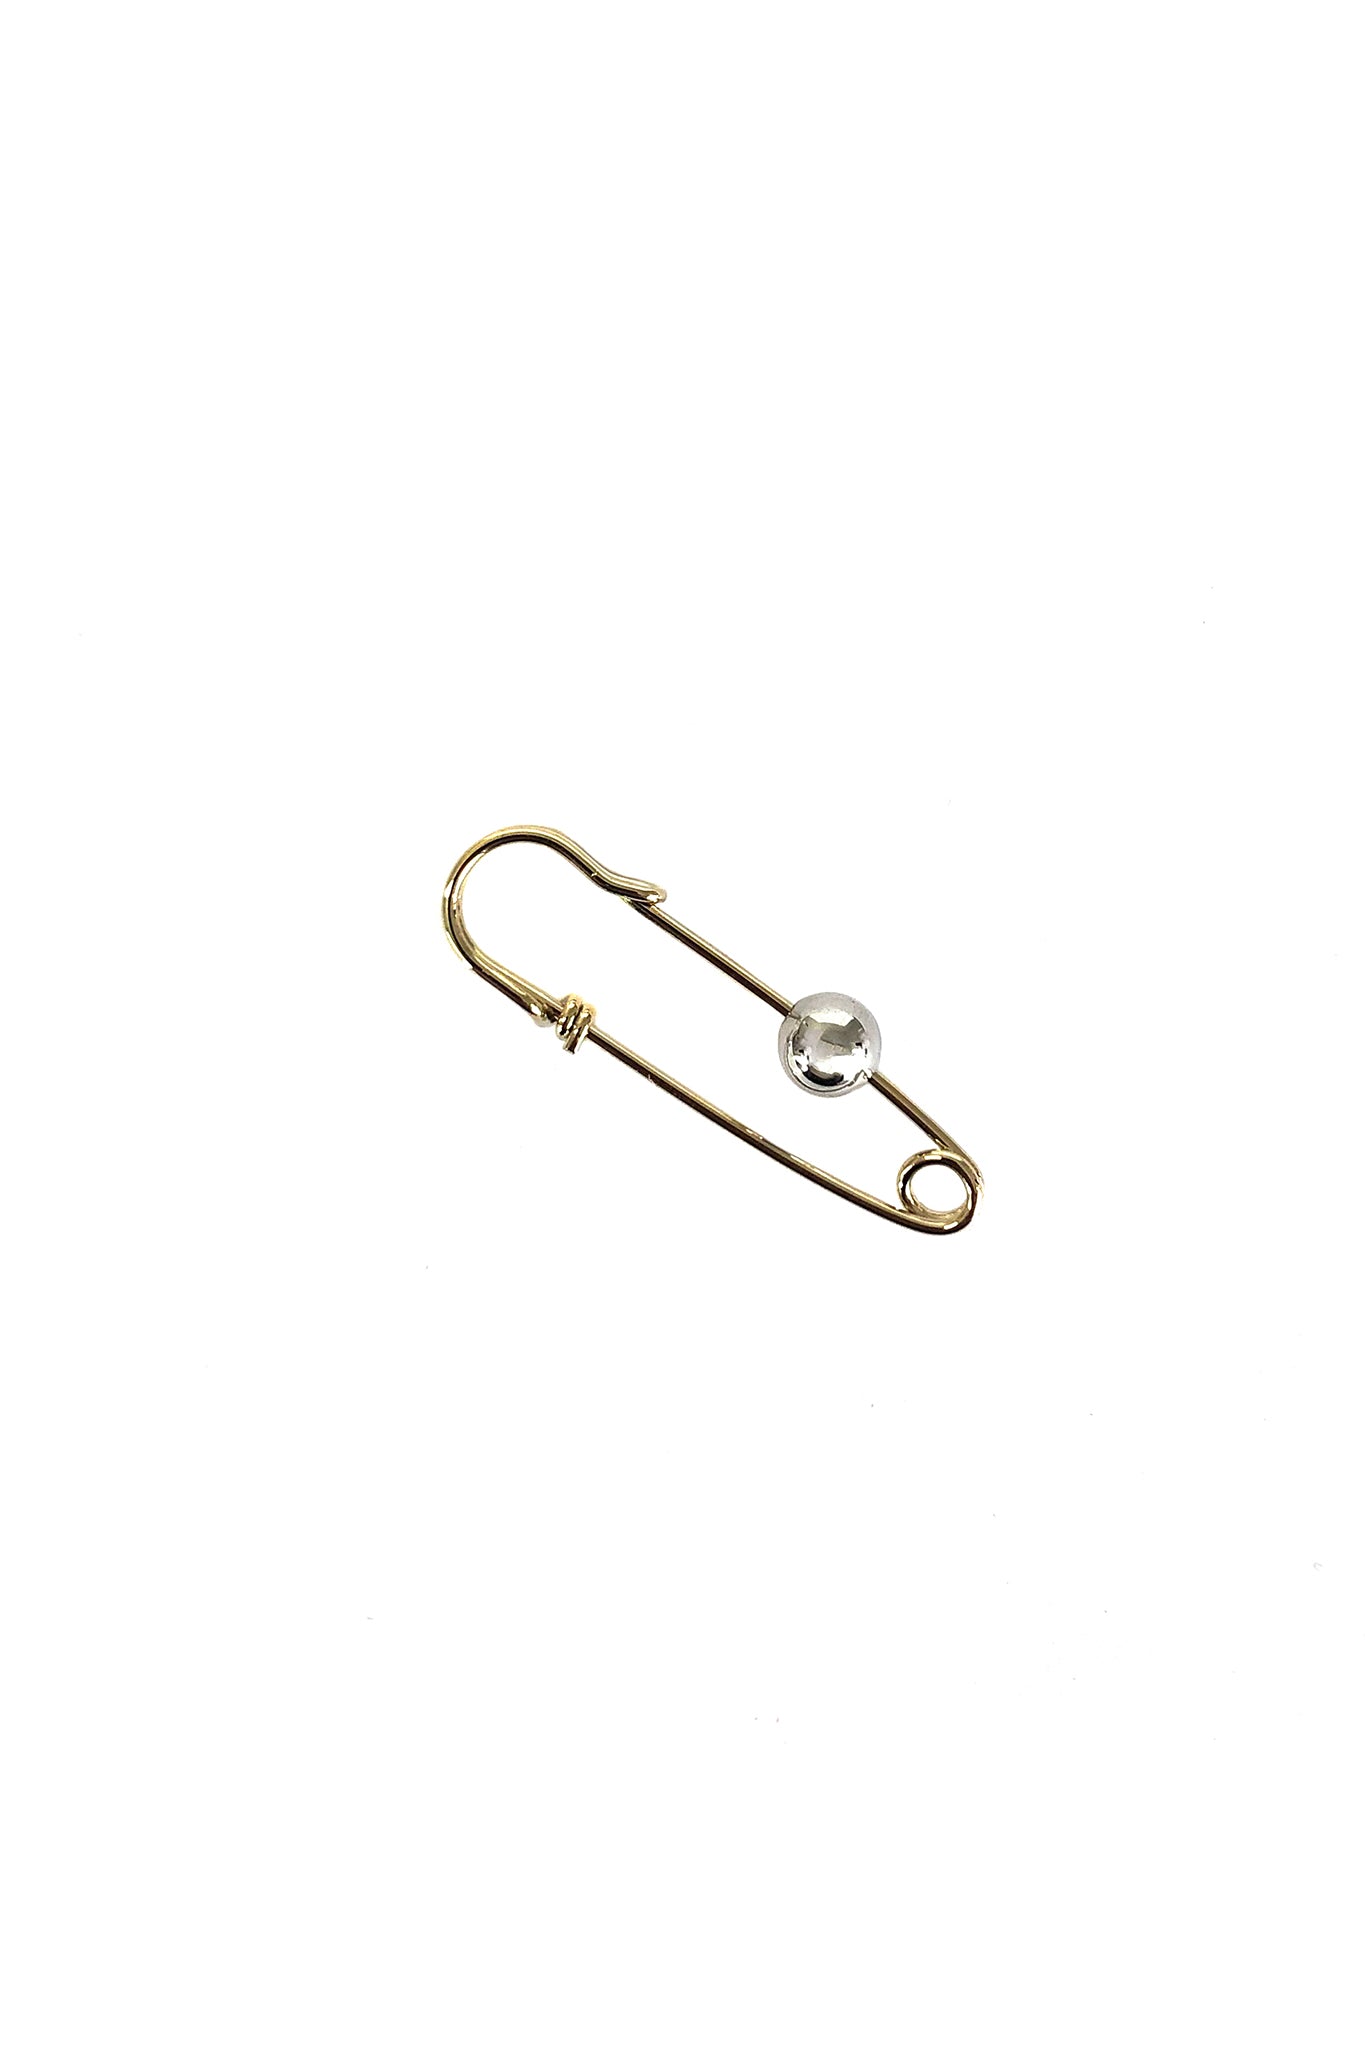 Justine Clenquet Ash Single Earring